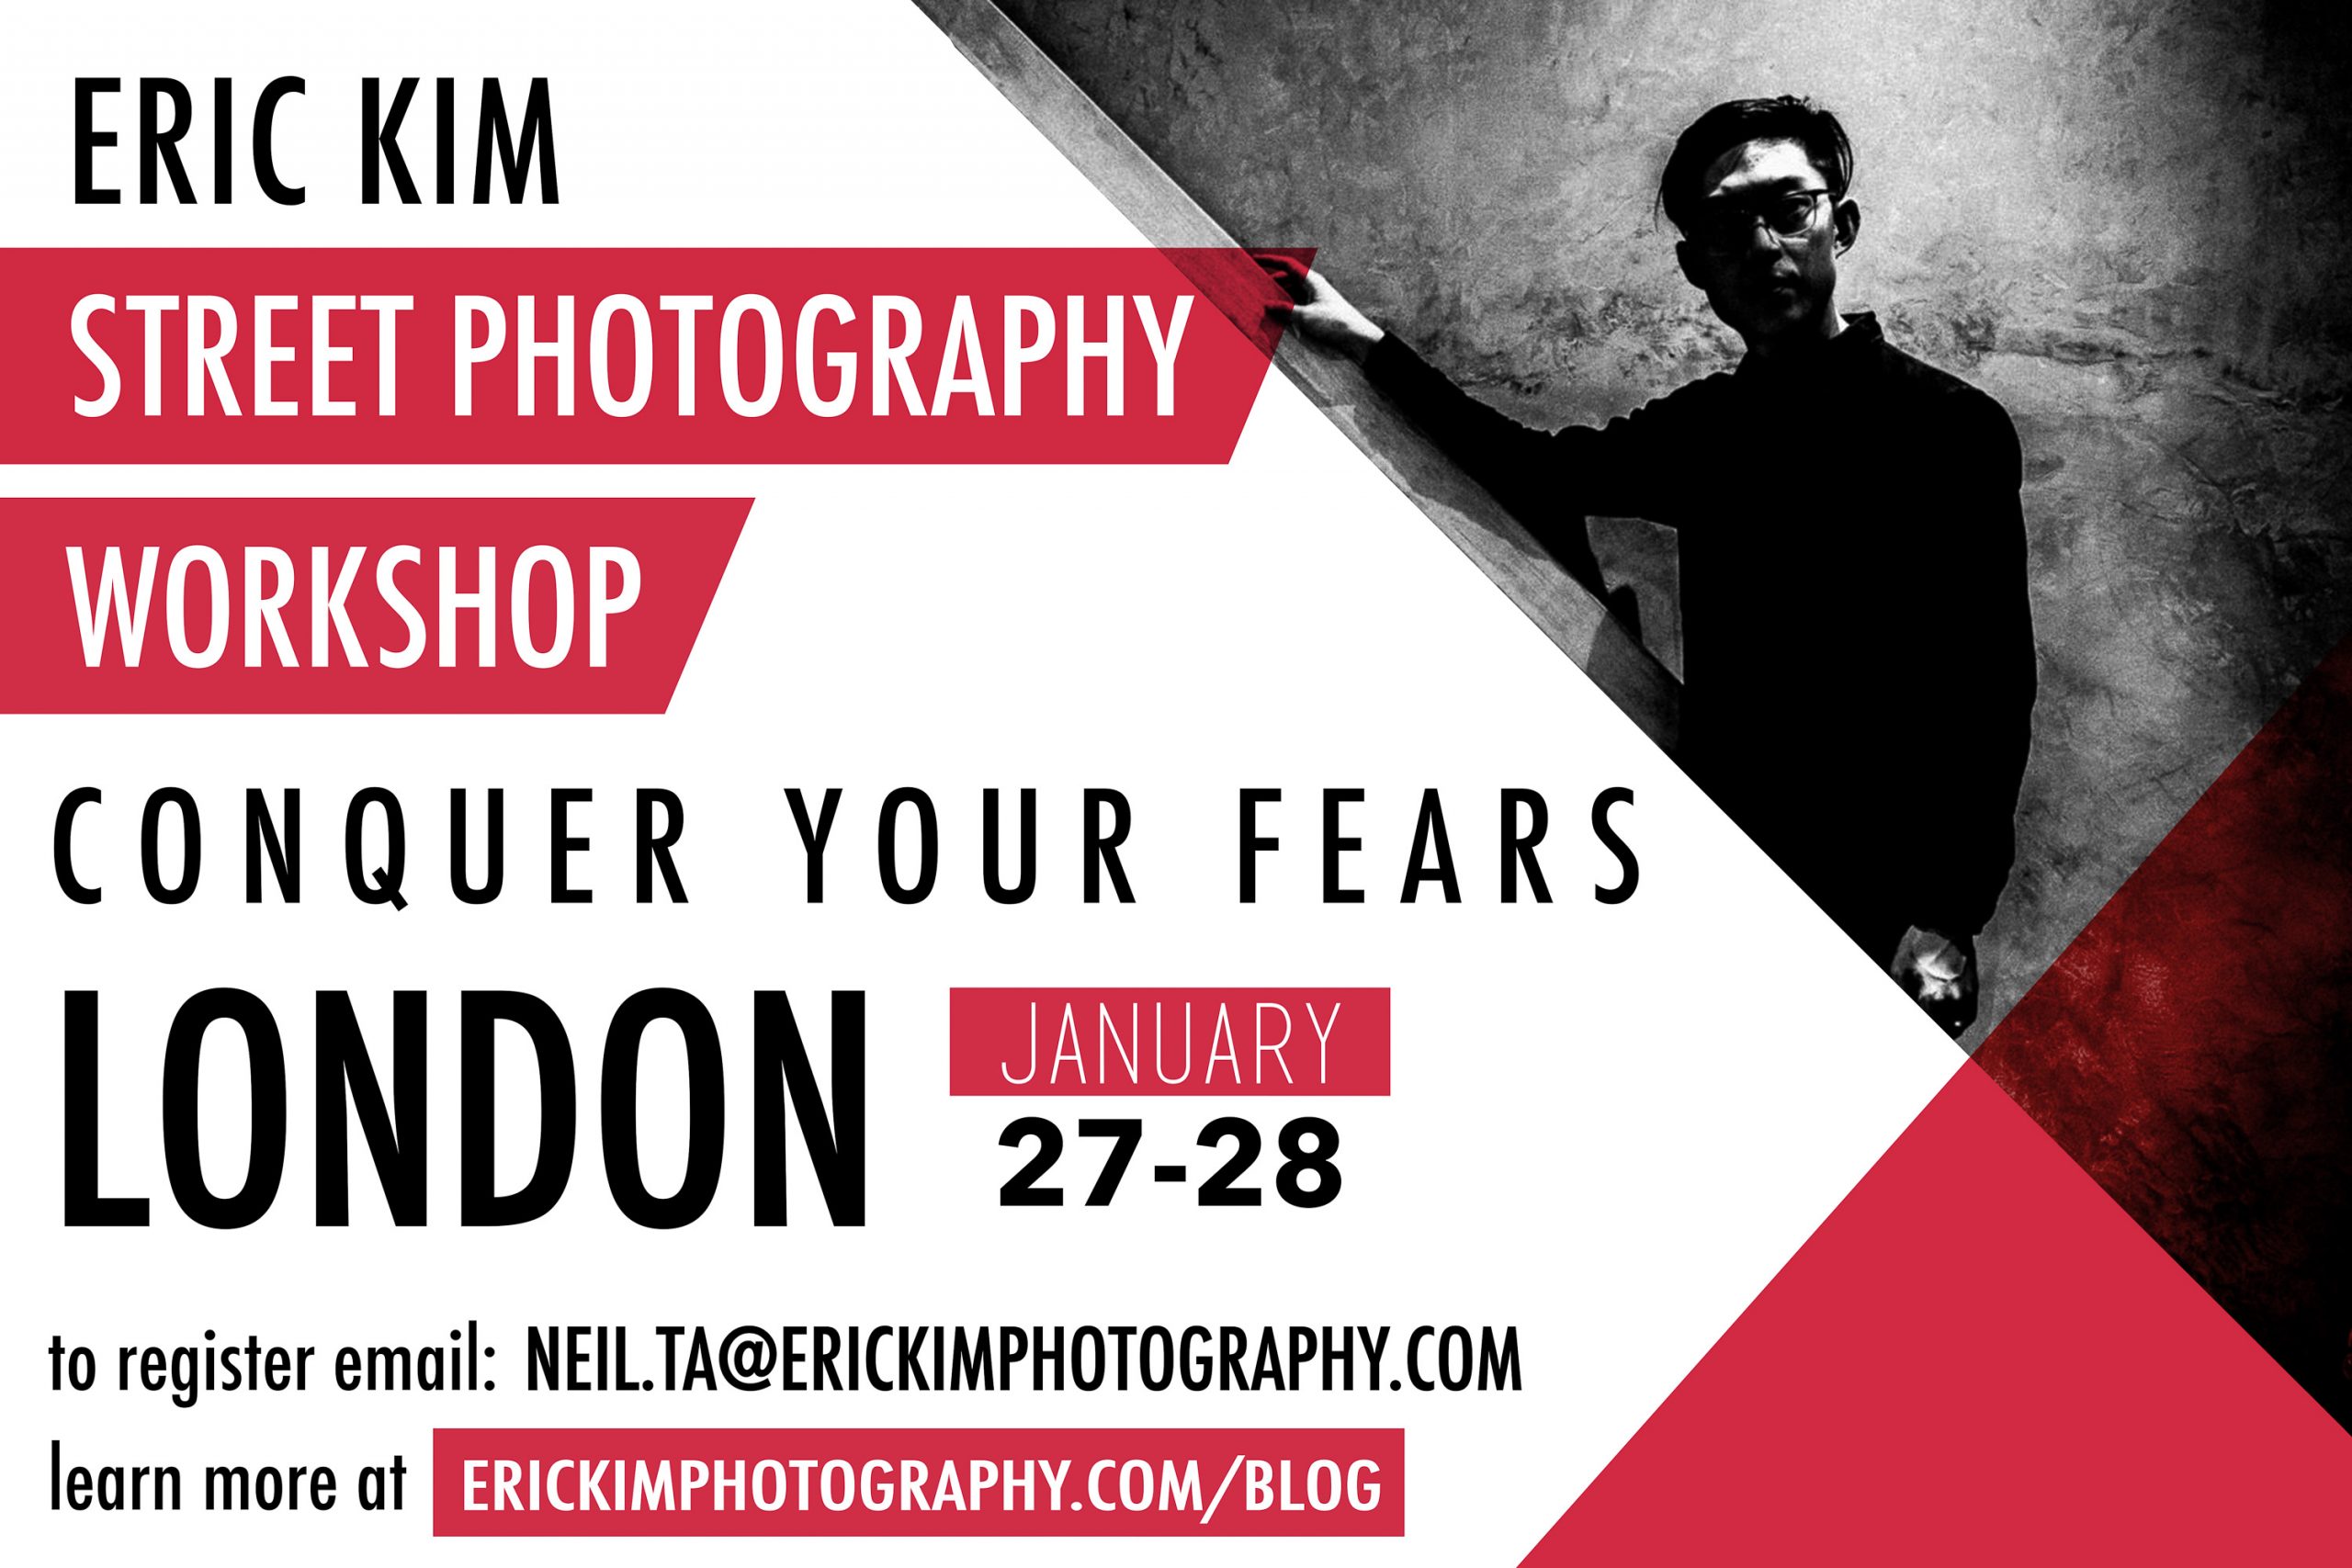 Less than 27 Days Left For Early Bird Discount For London Conquer Your Fears in Street Photography Workshop